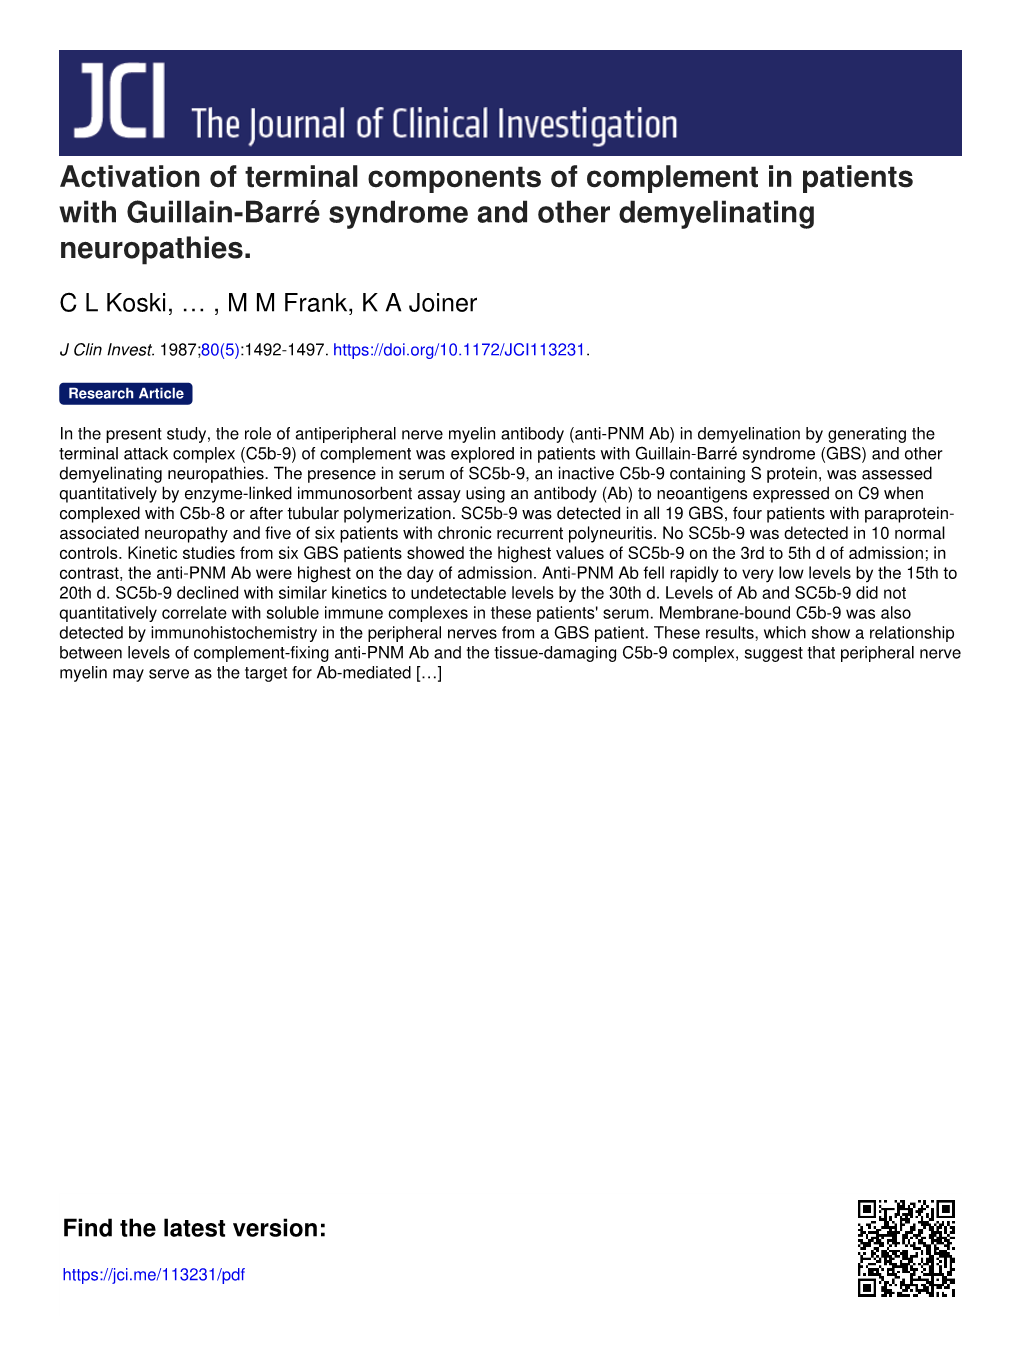 Activation of Terminal Components of Complement in Patients with Guillain-Barré Syndrome and Other Demyelinating Neuropathies